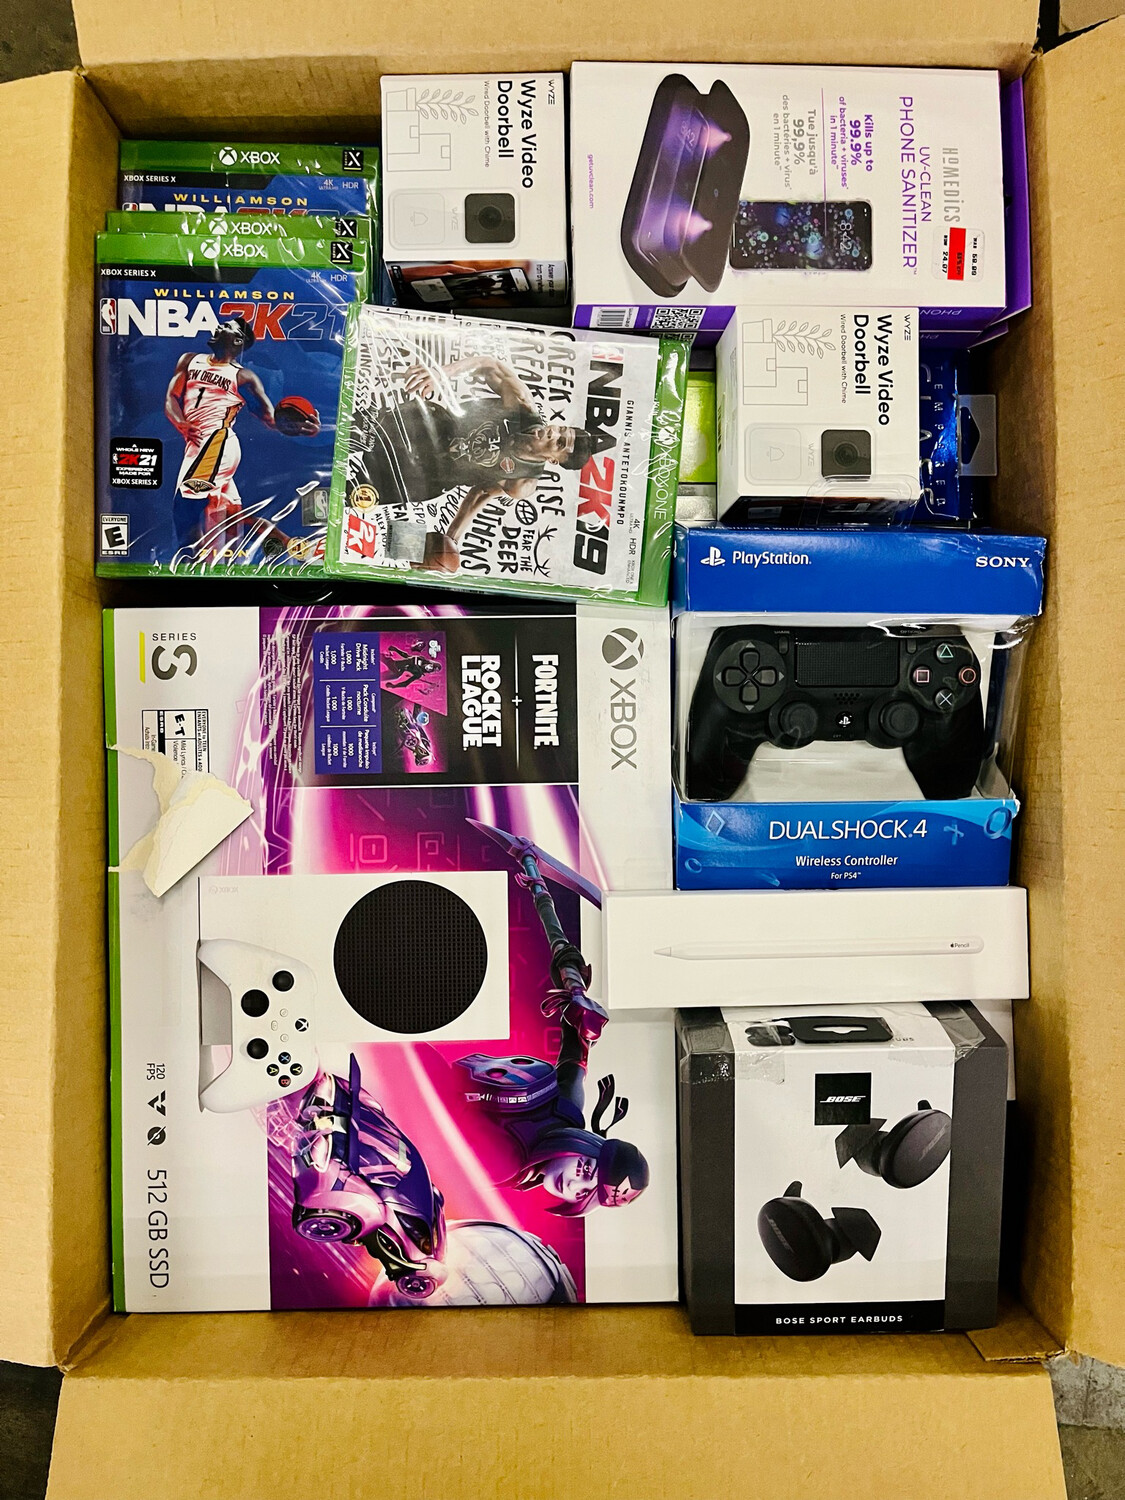 MYSTERY BOX ❗️ ELECTRONICS INCLUDED - Internet & Media Streamers